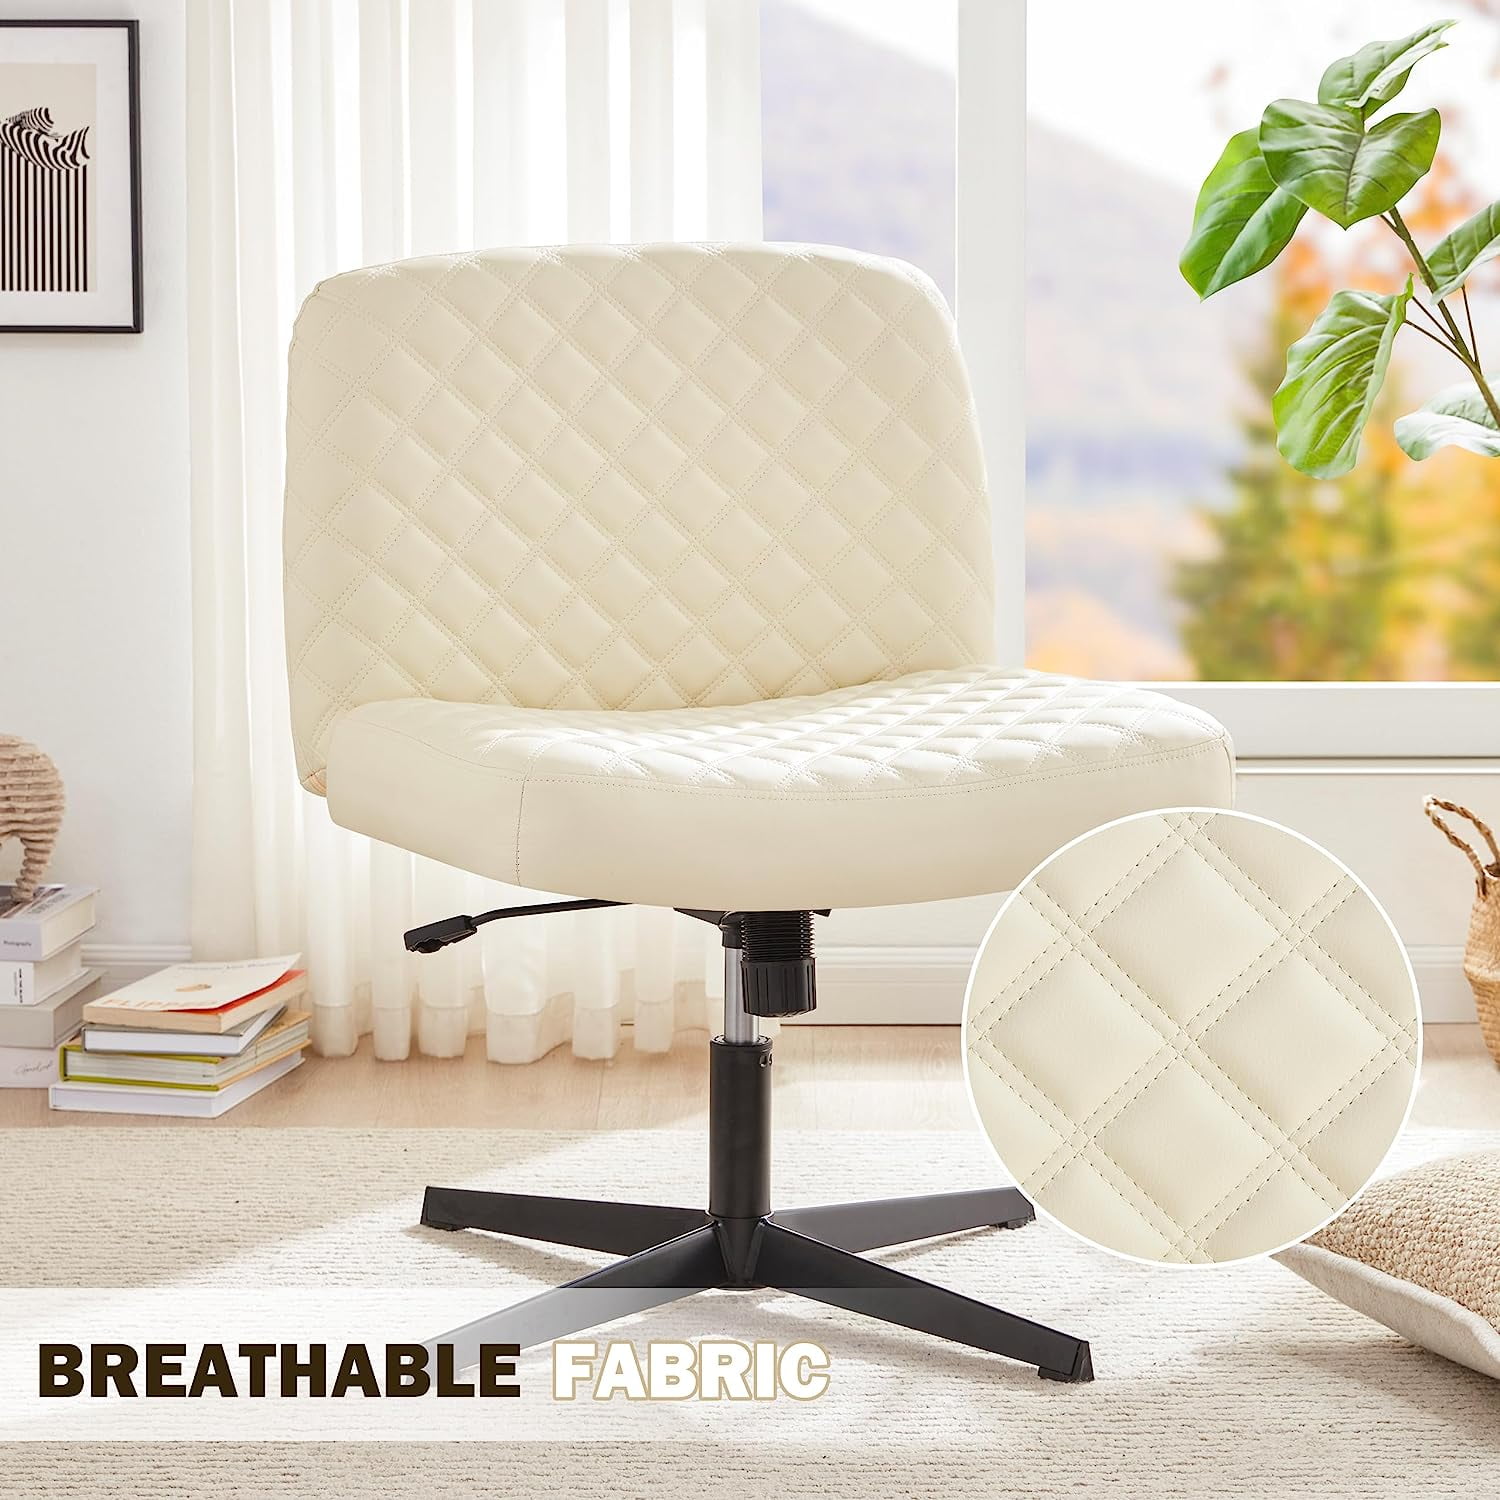 Weture Armless Office Desk Chair, Cross Legged Chair No Wheels, Thickened Wide Seat Office Chair, Padded Comfy Modern Desk Chair No Arms, Detachable 